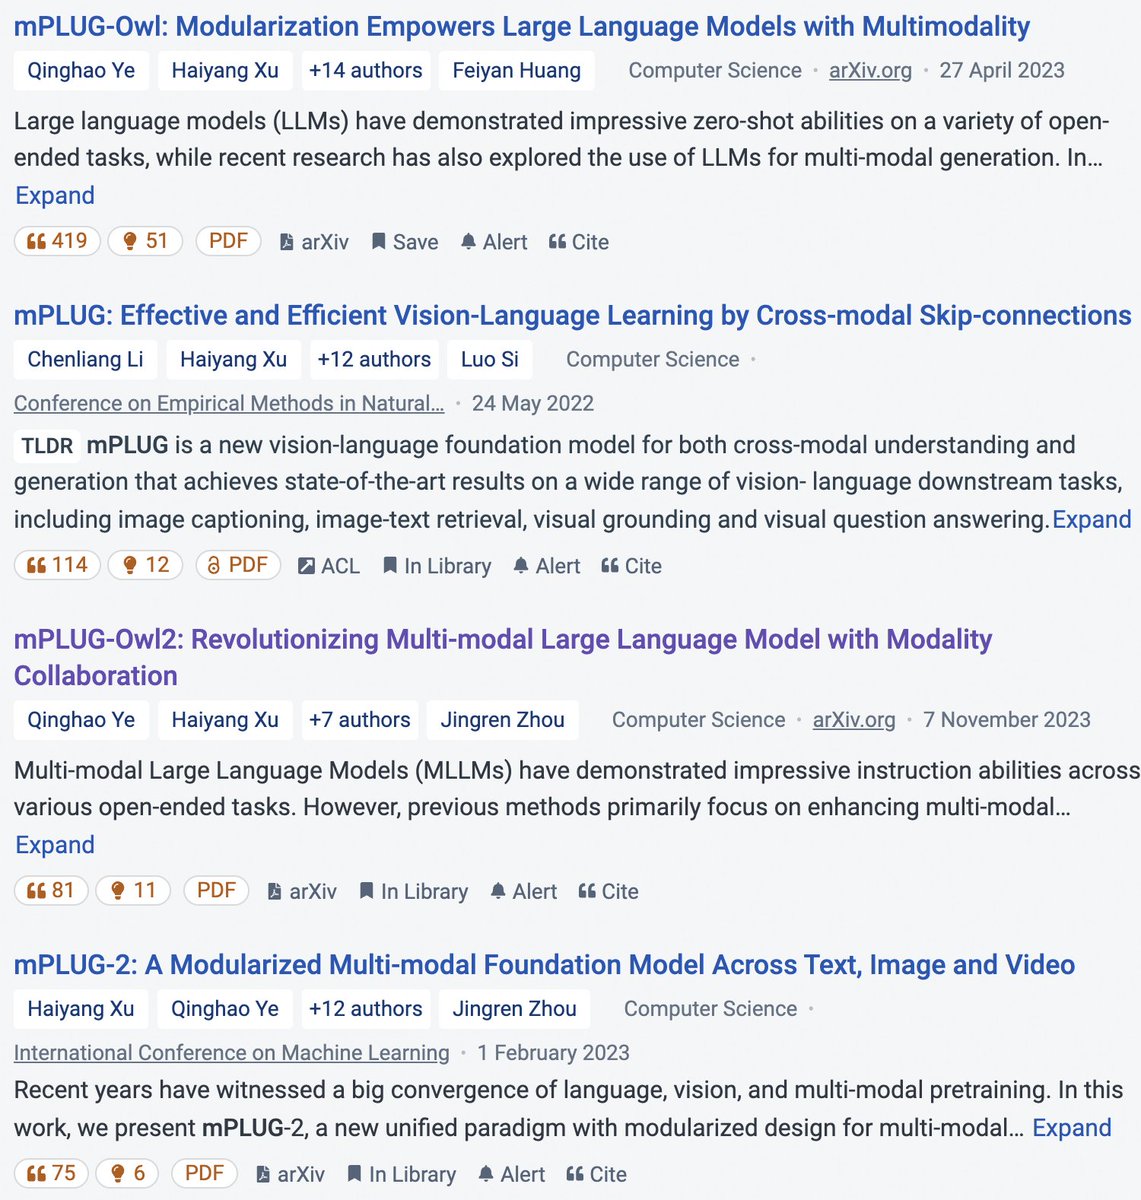 🚀mPLUG's Milestones
1. The mPLUG-Owl project reaches 2k stars
2. The mPLUG-Owl paper exceeds 400 citations，mPLUG exceeds 100 citations
3. The mPLUG-Owl2 is selected as CVPR 2024 Highlight
🔗Code: github.com/X-PLUG
🔥Welcome to ⭐️ and keep following the mPLUG Project！！